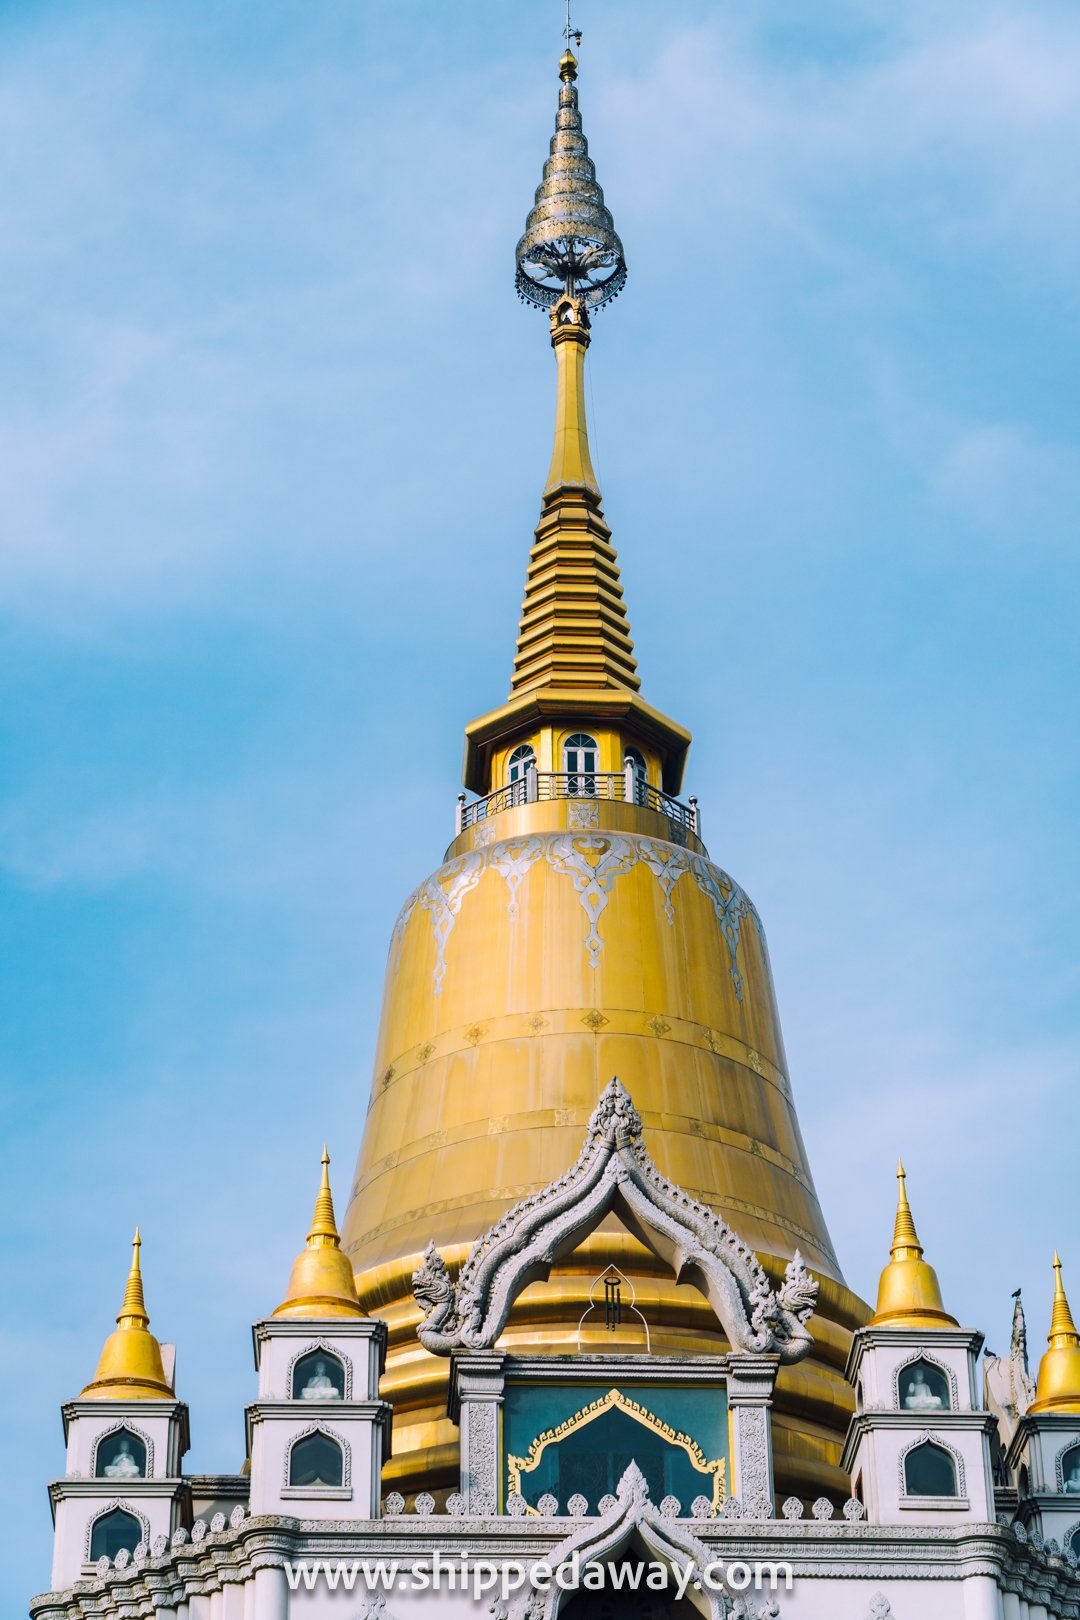 Buu Long Pagoda tower in Ho Chi Minh City in Vietnam